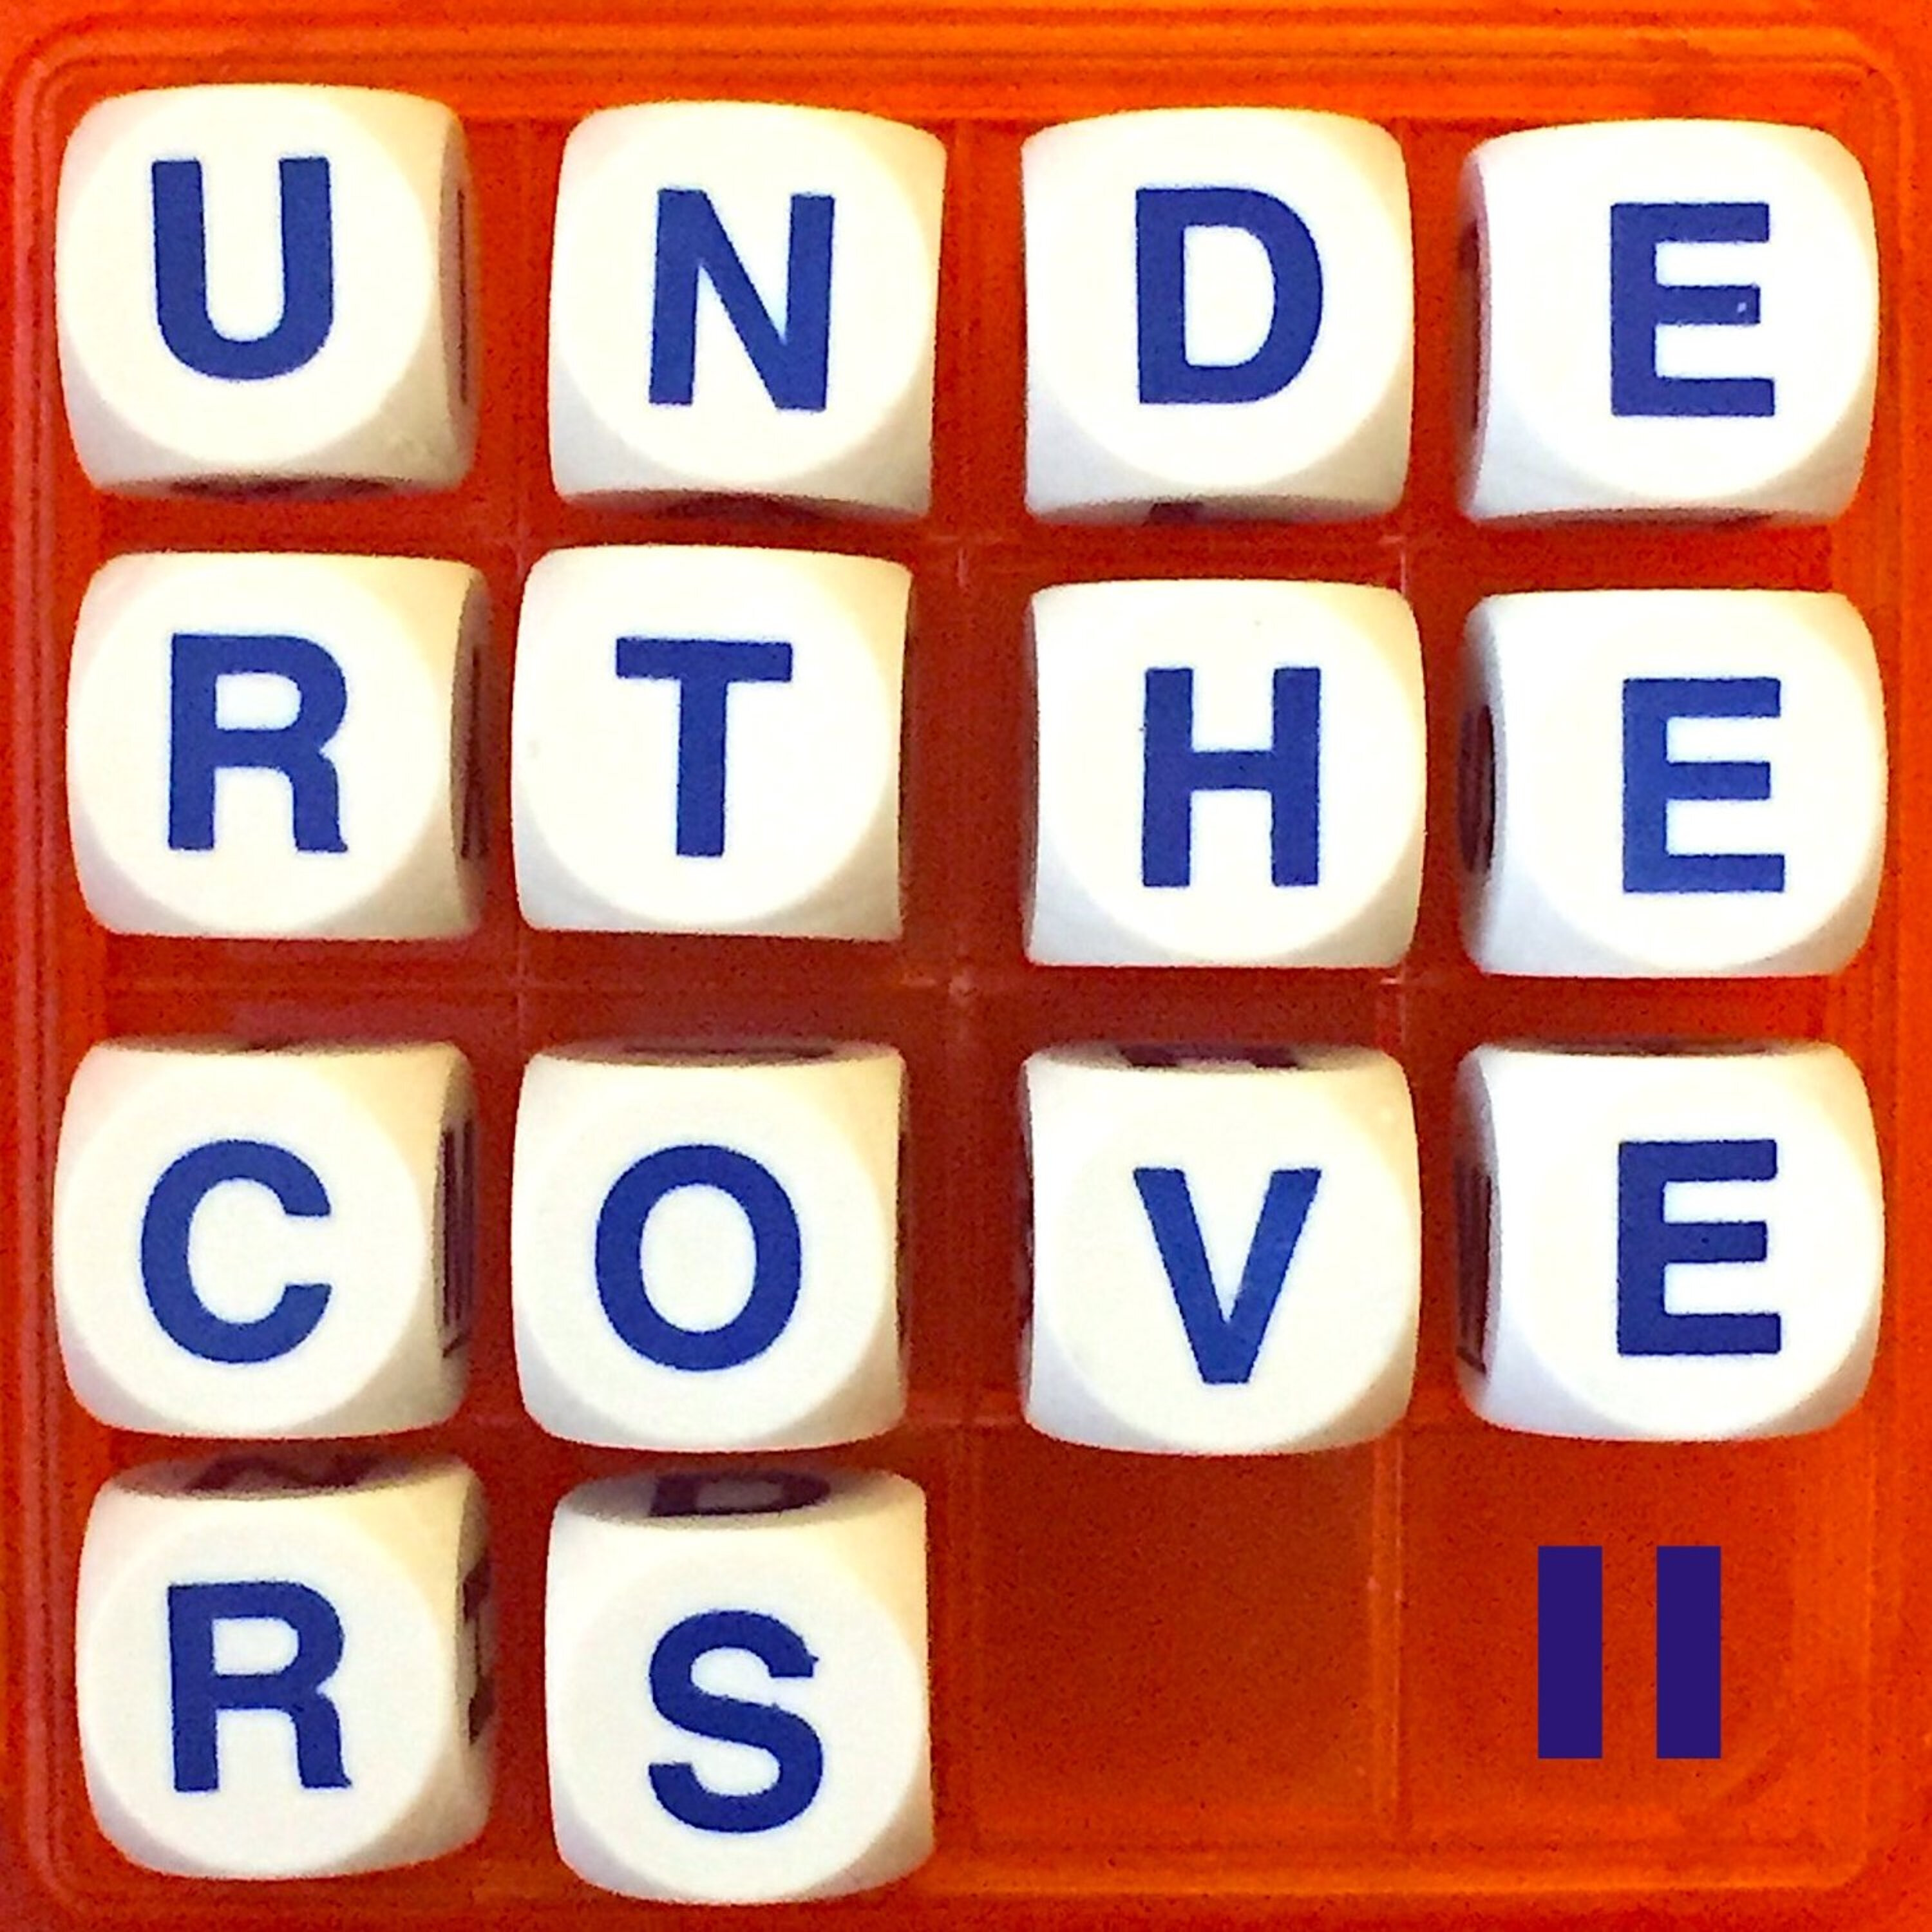 Thumbnail for "51. Under the Covers – part II".